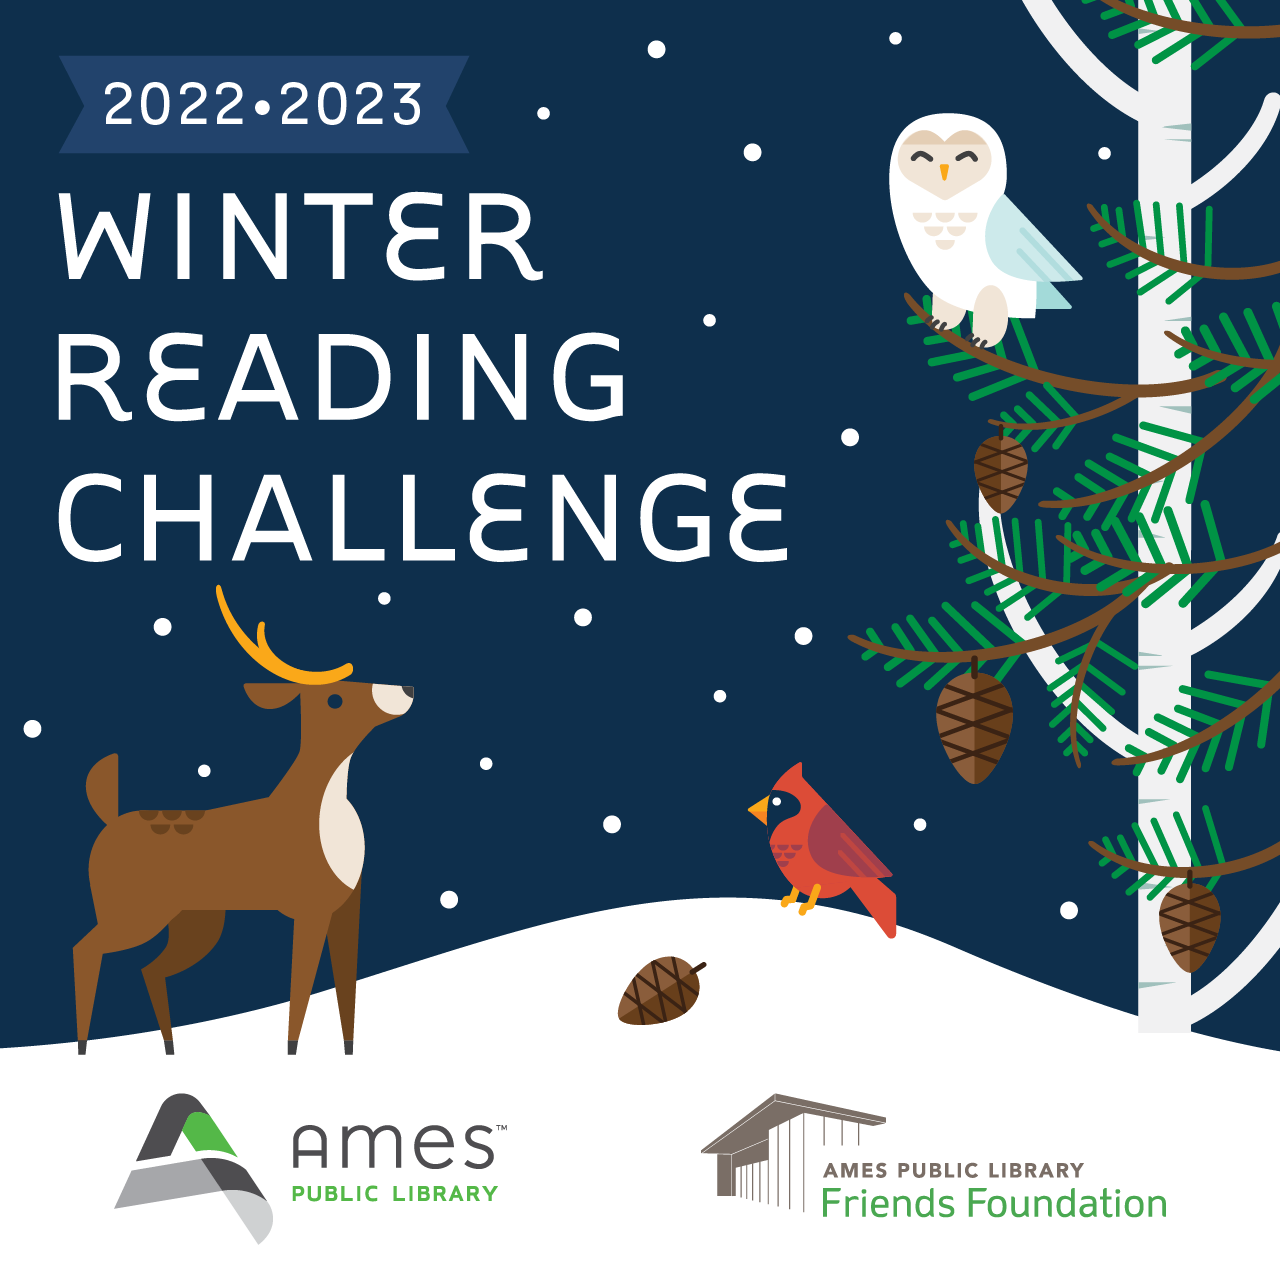 2022-2023 Winter Reading Challenge - Ames Public Library - Ames Public Library Friends Foundation